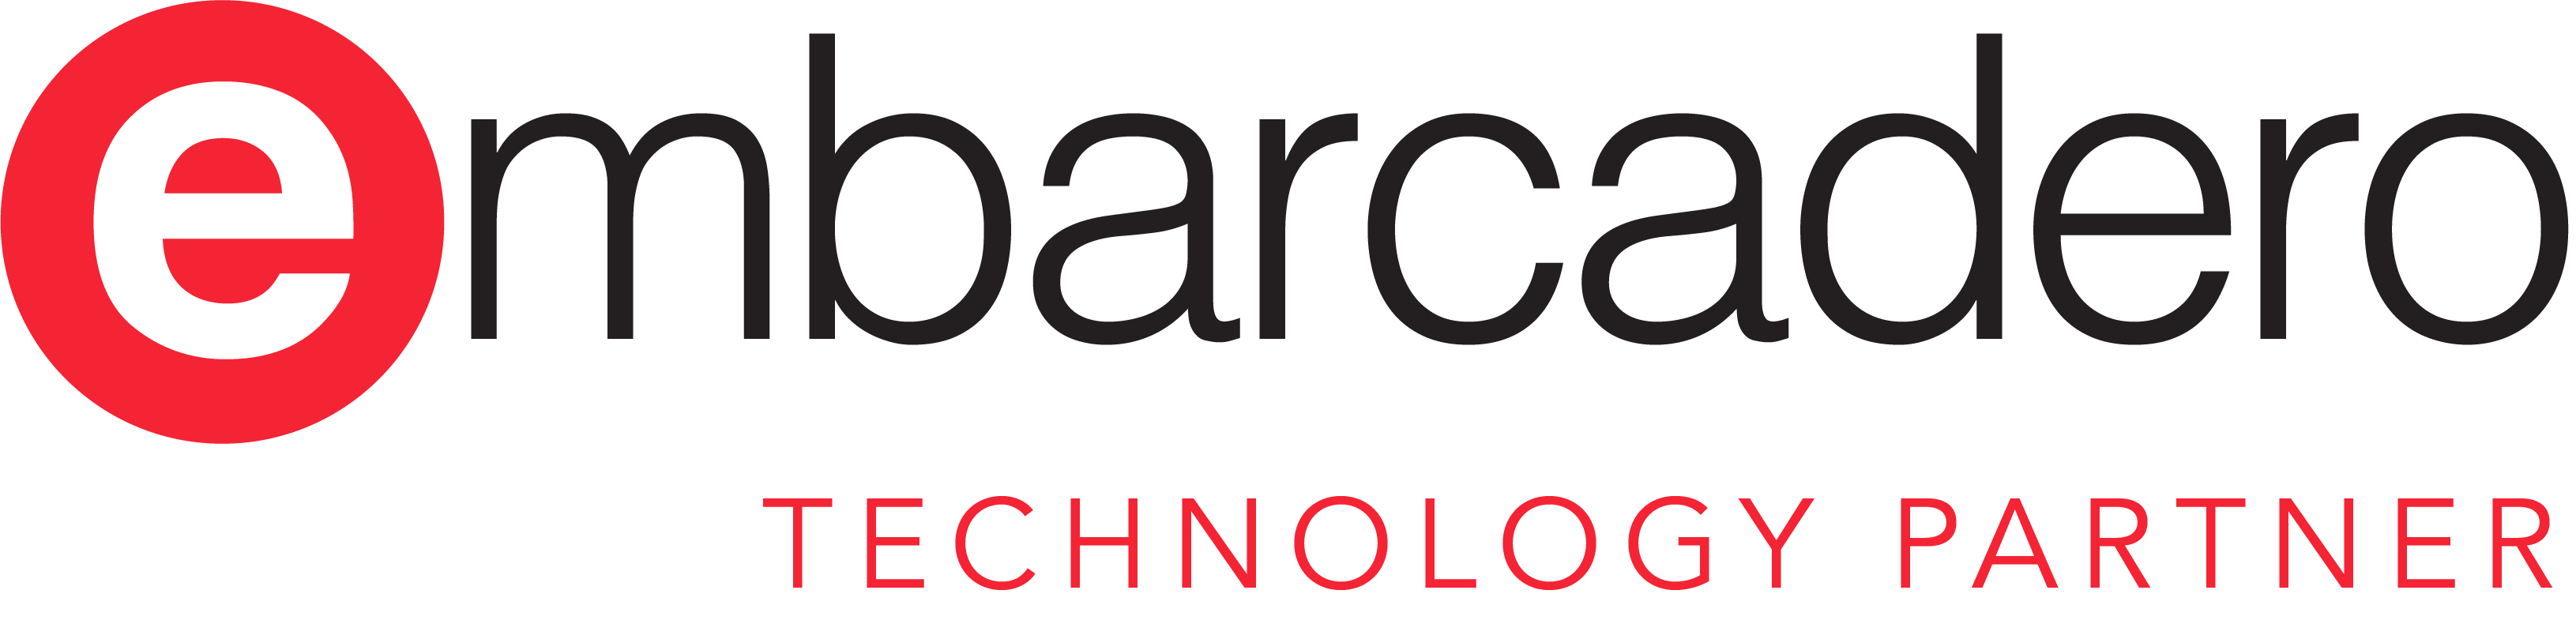 Tools and Components from Embarcadero Technology Partners